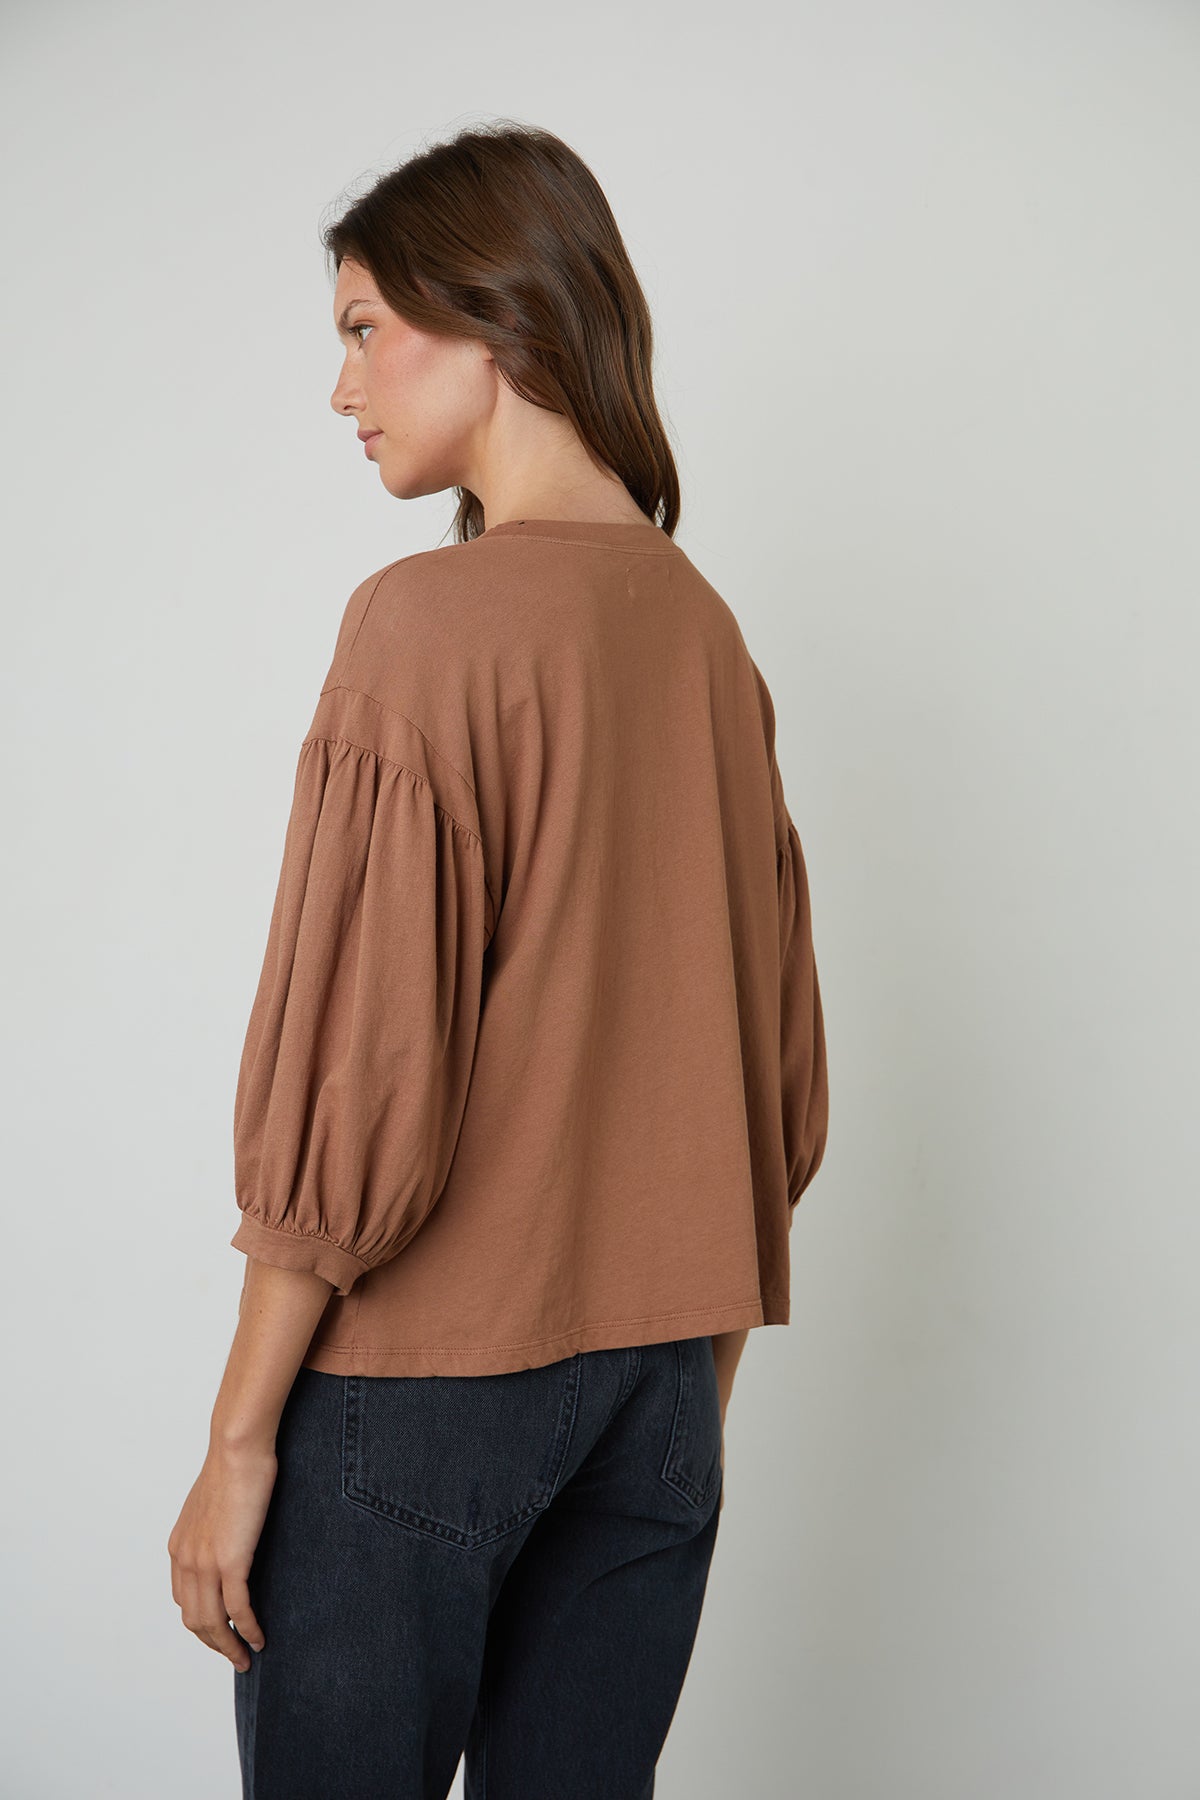   The back view of a woman wearing a Velvet by Graham & Spencer PRUDY 3/4 SLEEVE TEE that adds volume to her overall aesthetic. 